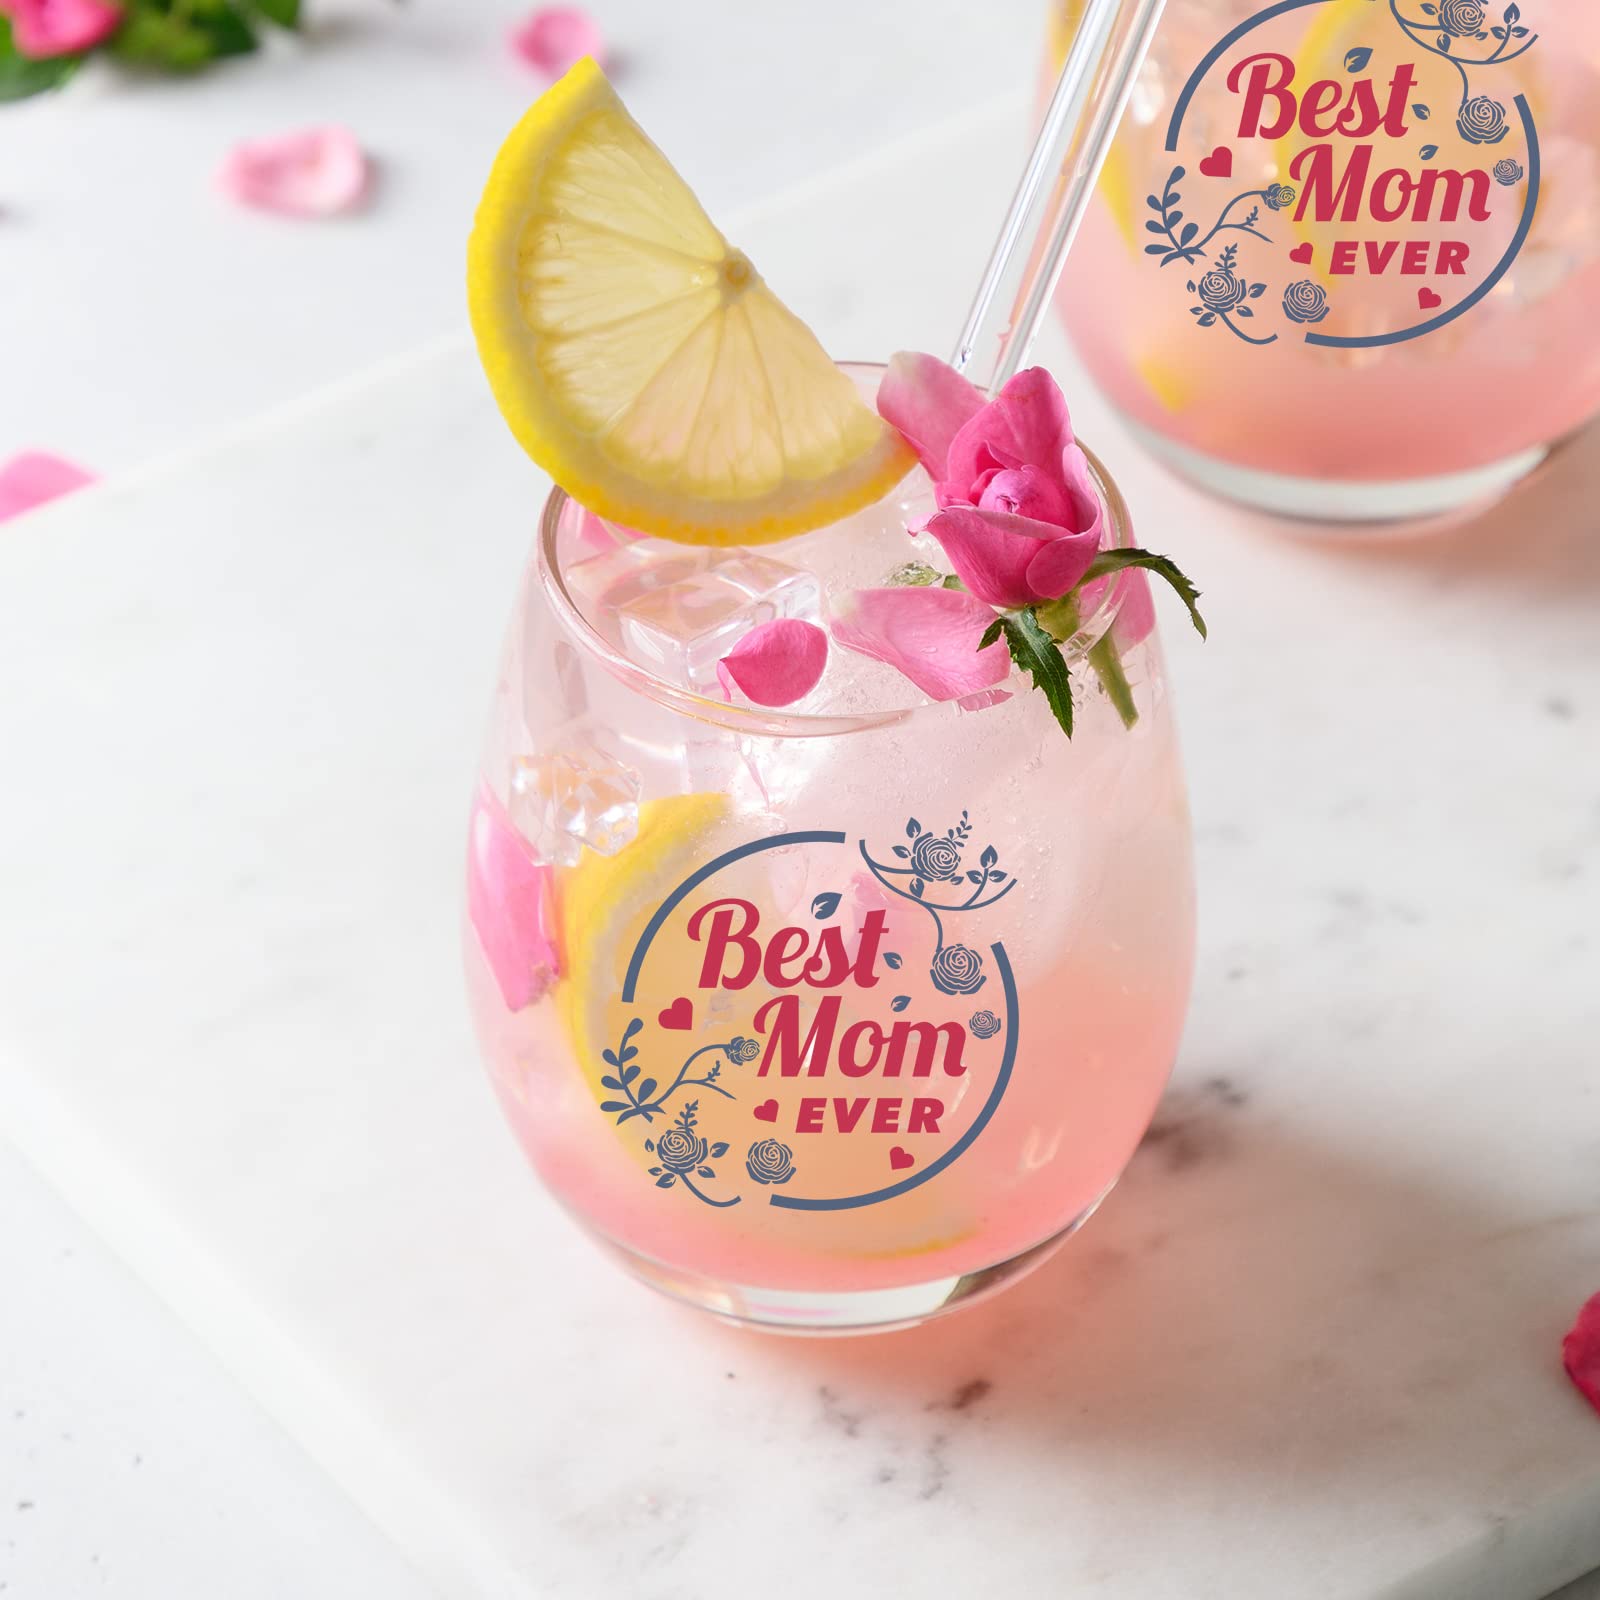 Best Mom Ever Wine Glass Christmas Gifts - Unique Wine Glasses Christmas Decorations Gifts for Mom